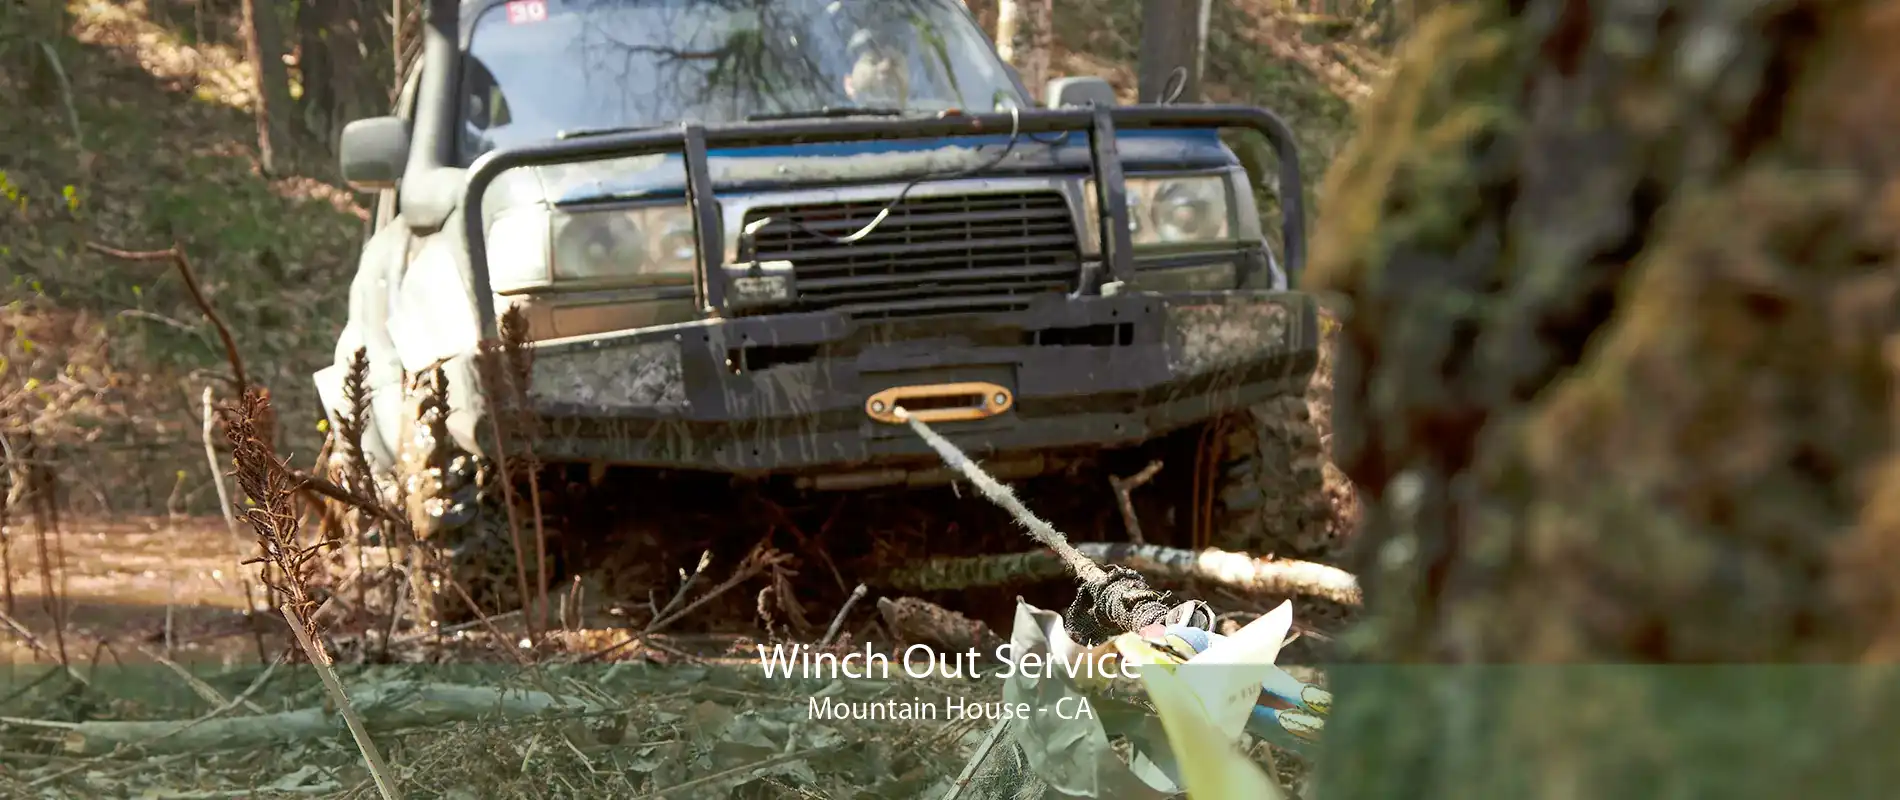 Winch Out Service Mountain House - CA